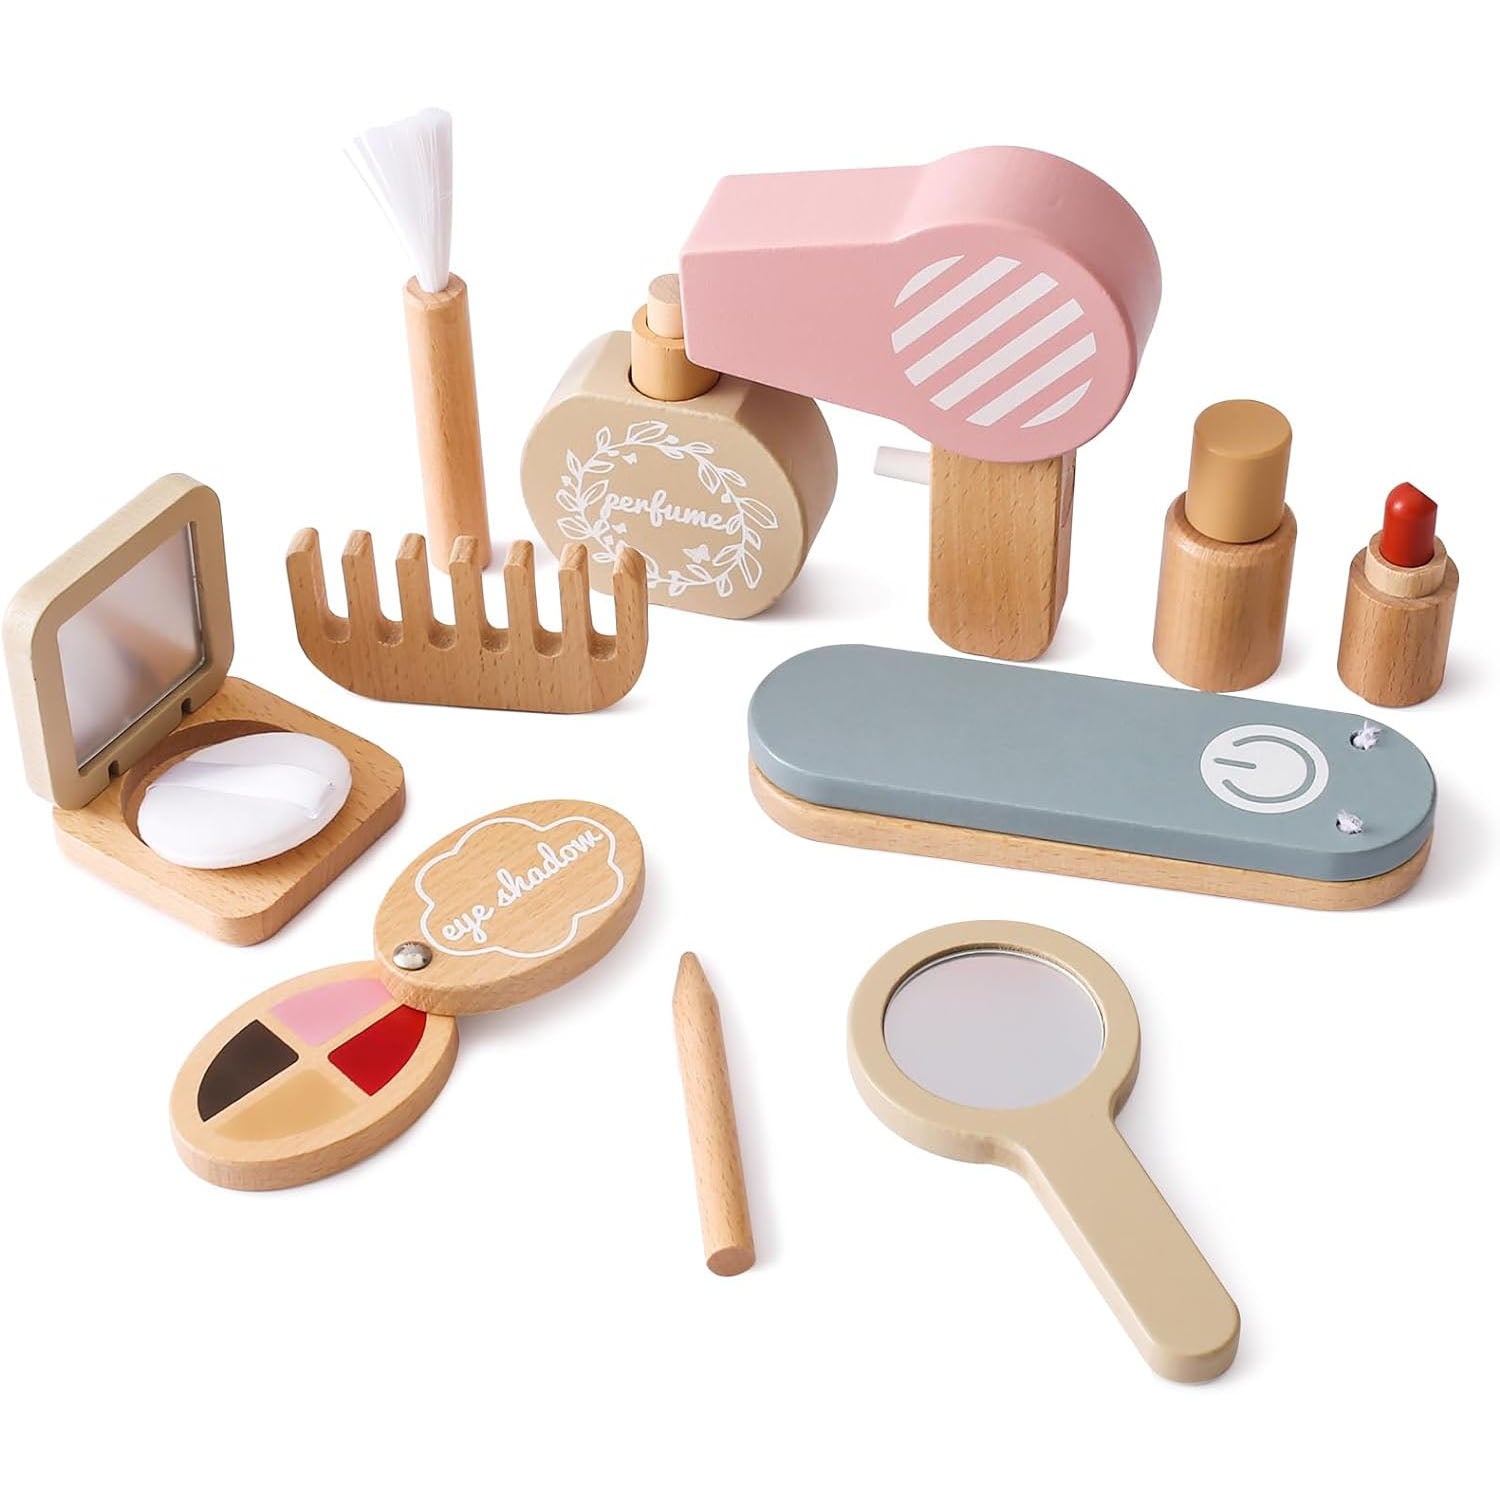 Wooden Make Up Pretend Play Set Perfect Gift Set for Girls